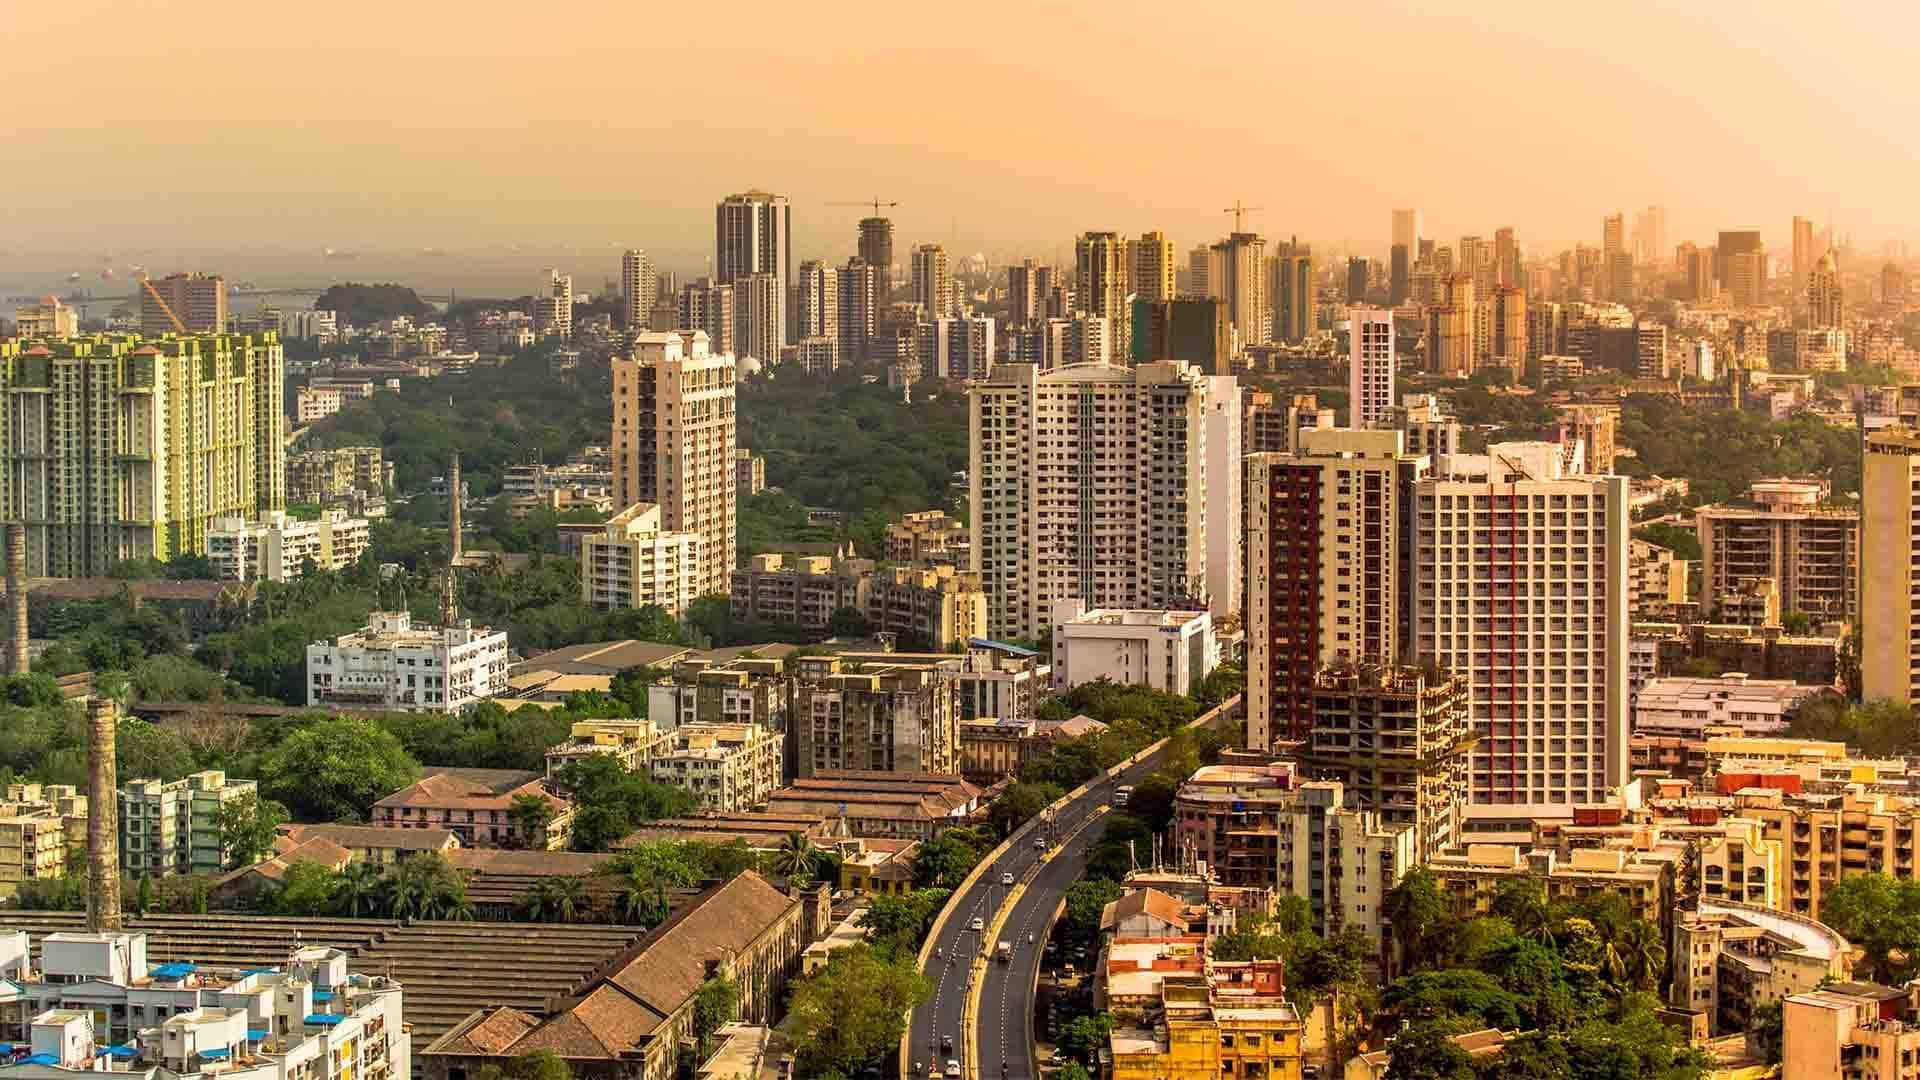 Nifty Realty rises to all-time high: Will real-estate boom continue?